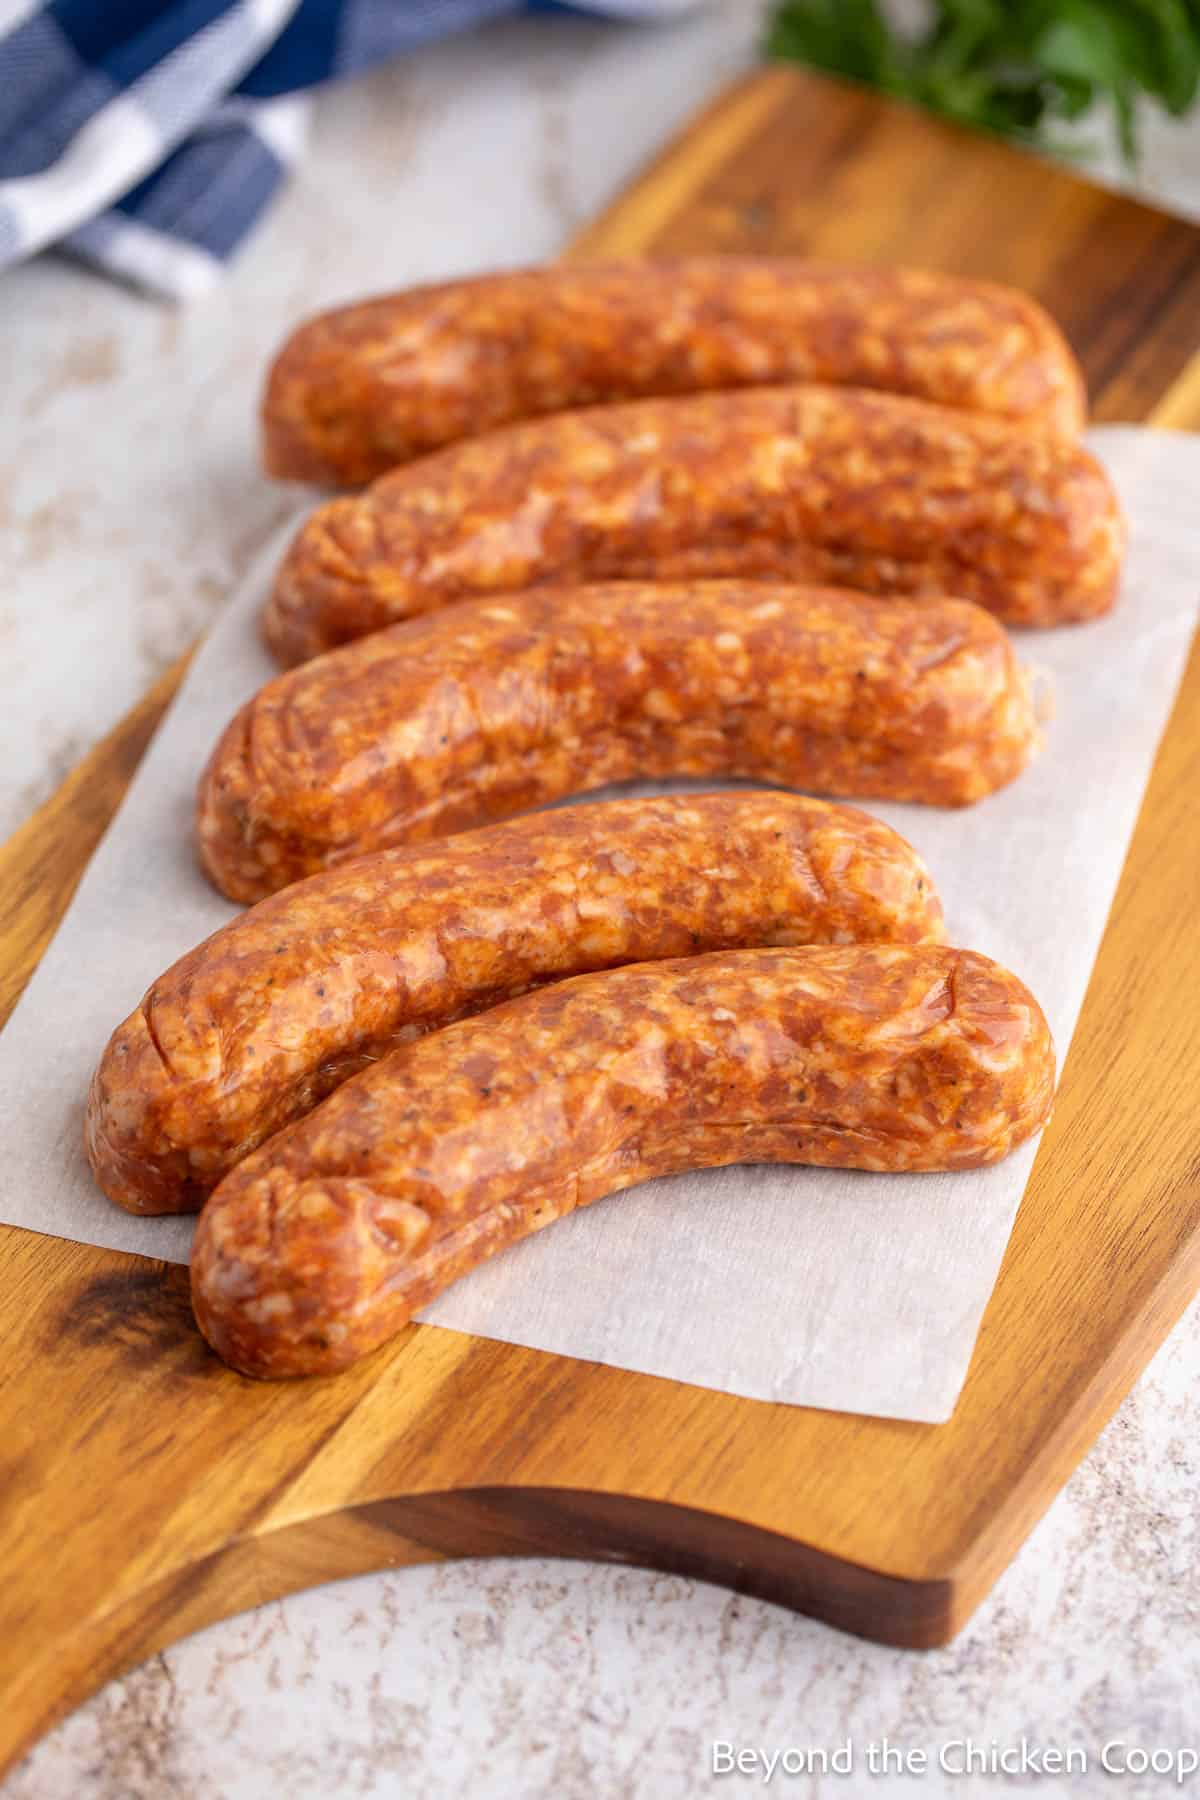 Five uncooked sausages on a board. 